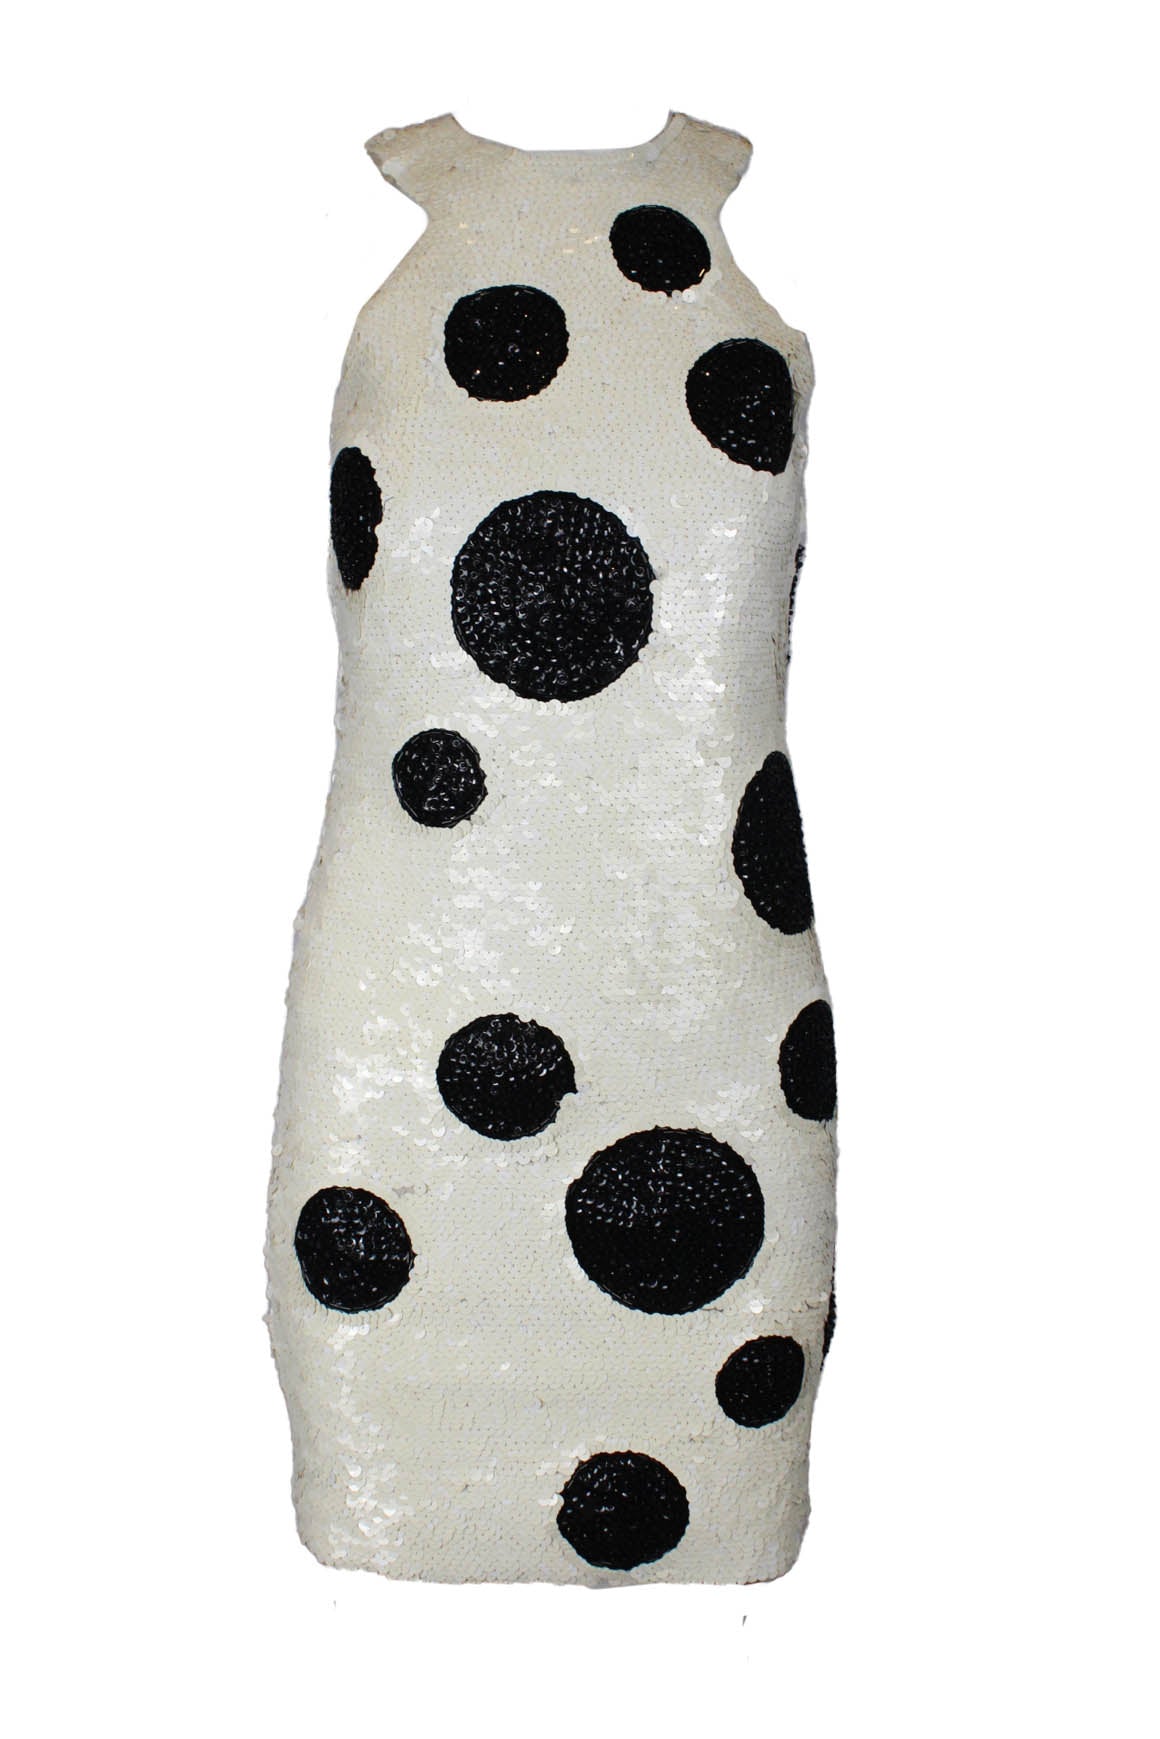 description: vintage blass dress by bill blass white and black polka dot sequin dress. features halter neckline, zipper closure at center back, fitted style, and fully sequined. 